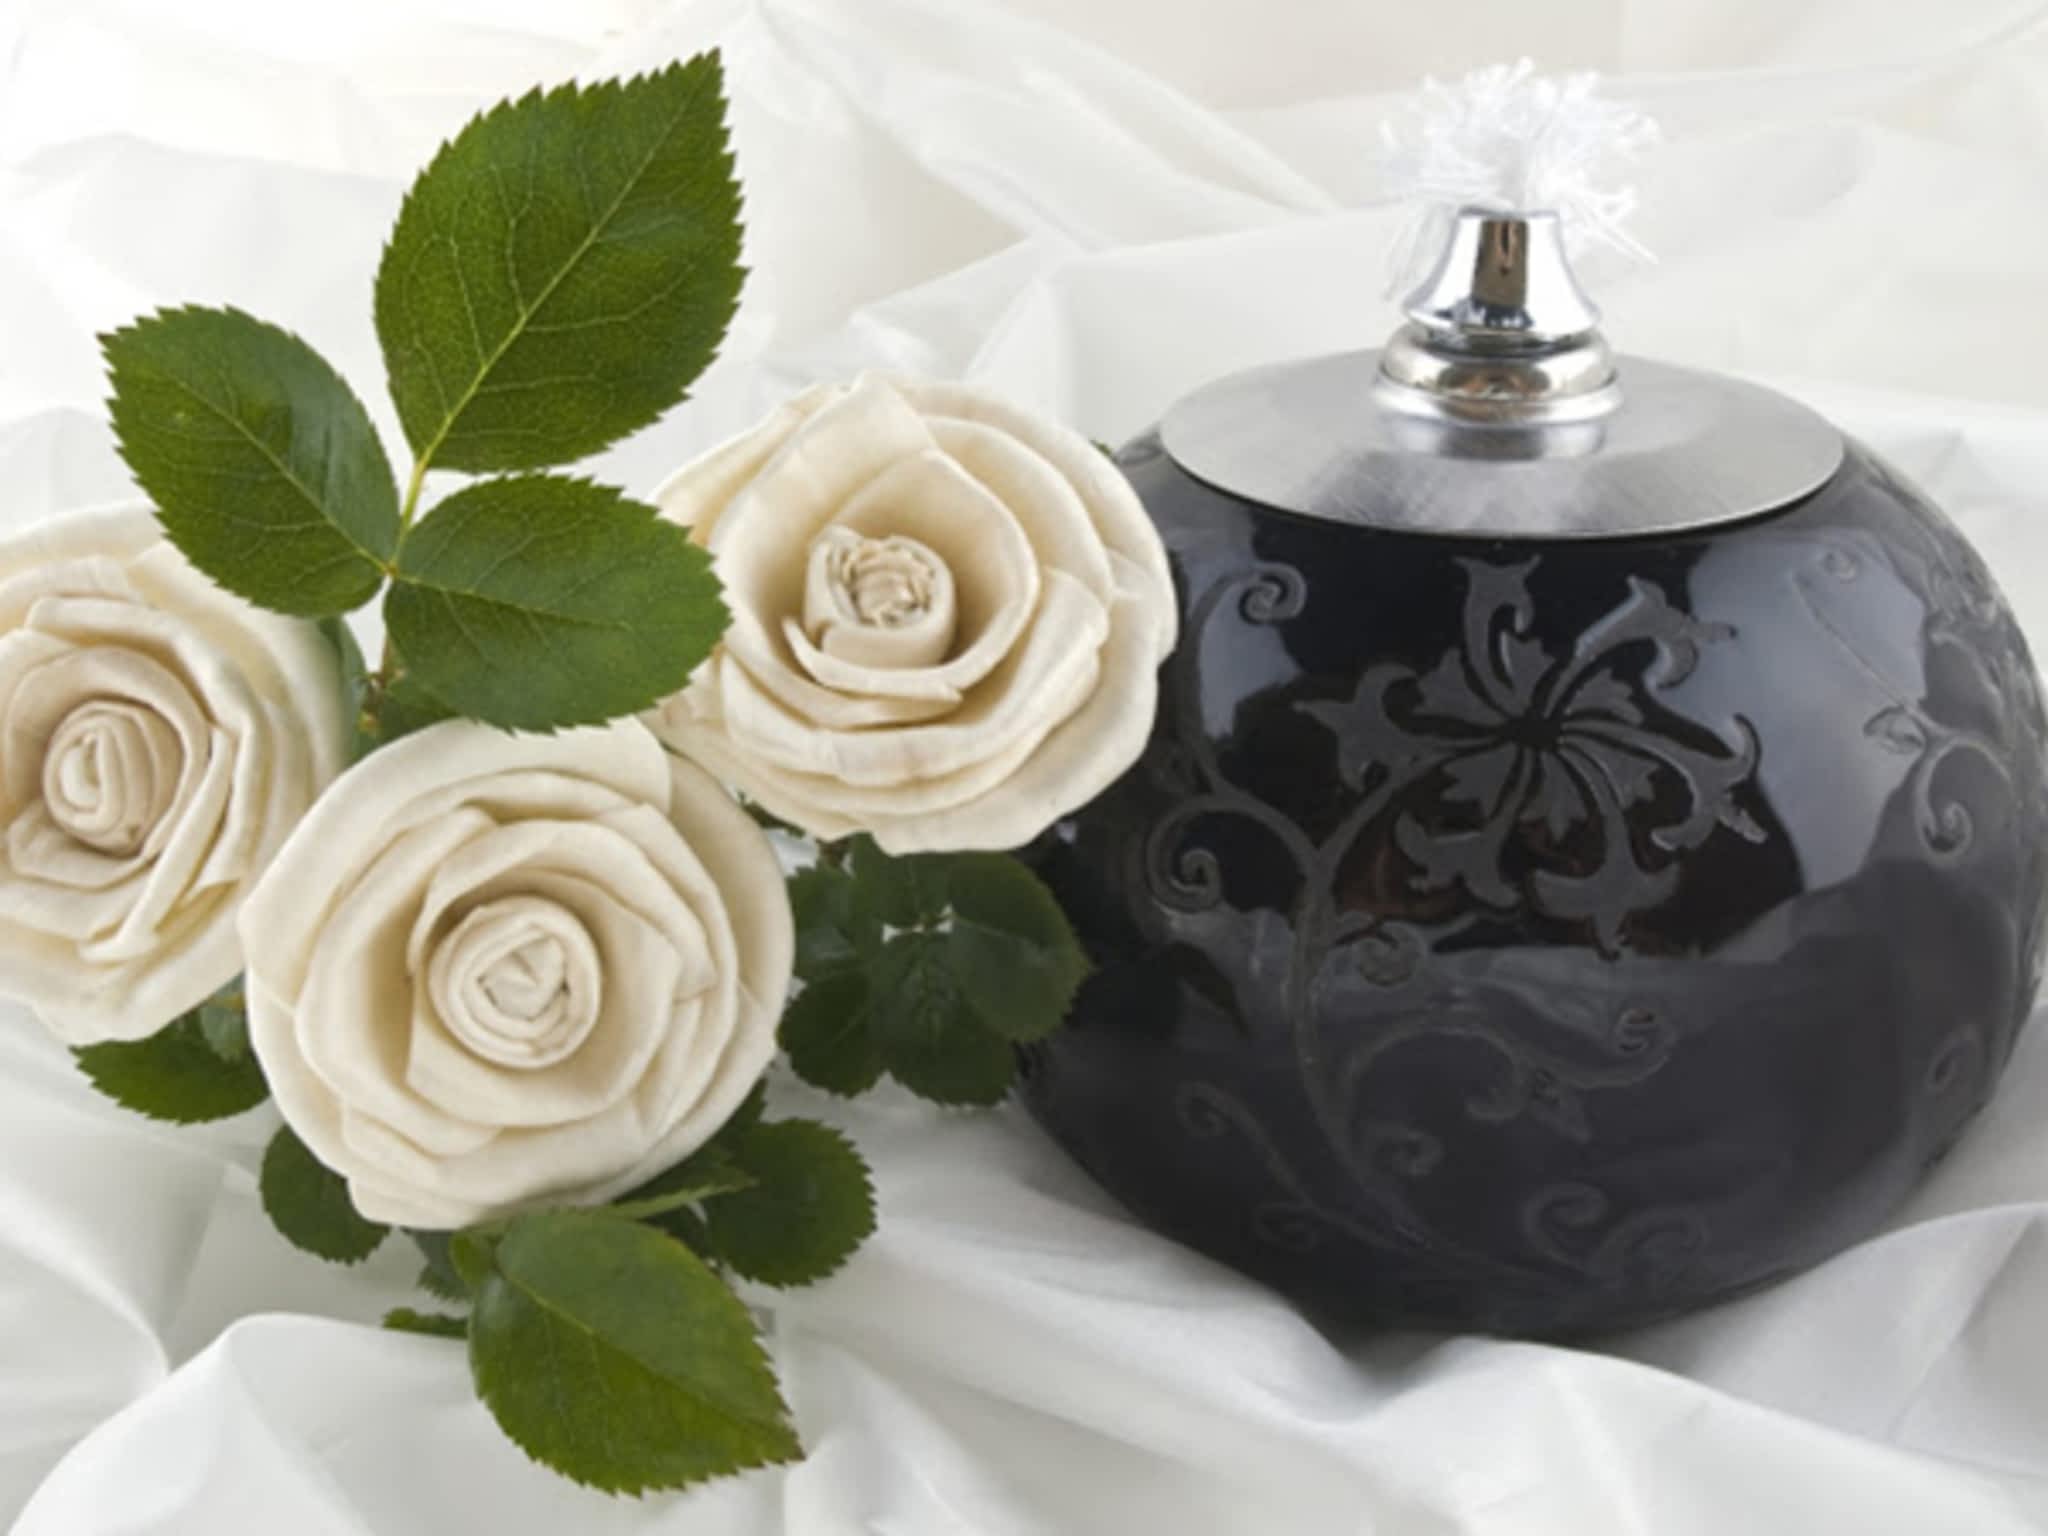 photo Basic Funerals And Cremation Choices